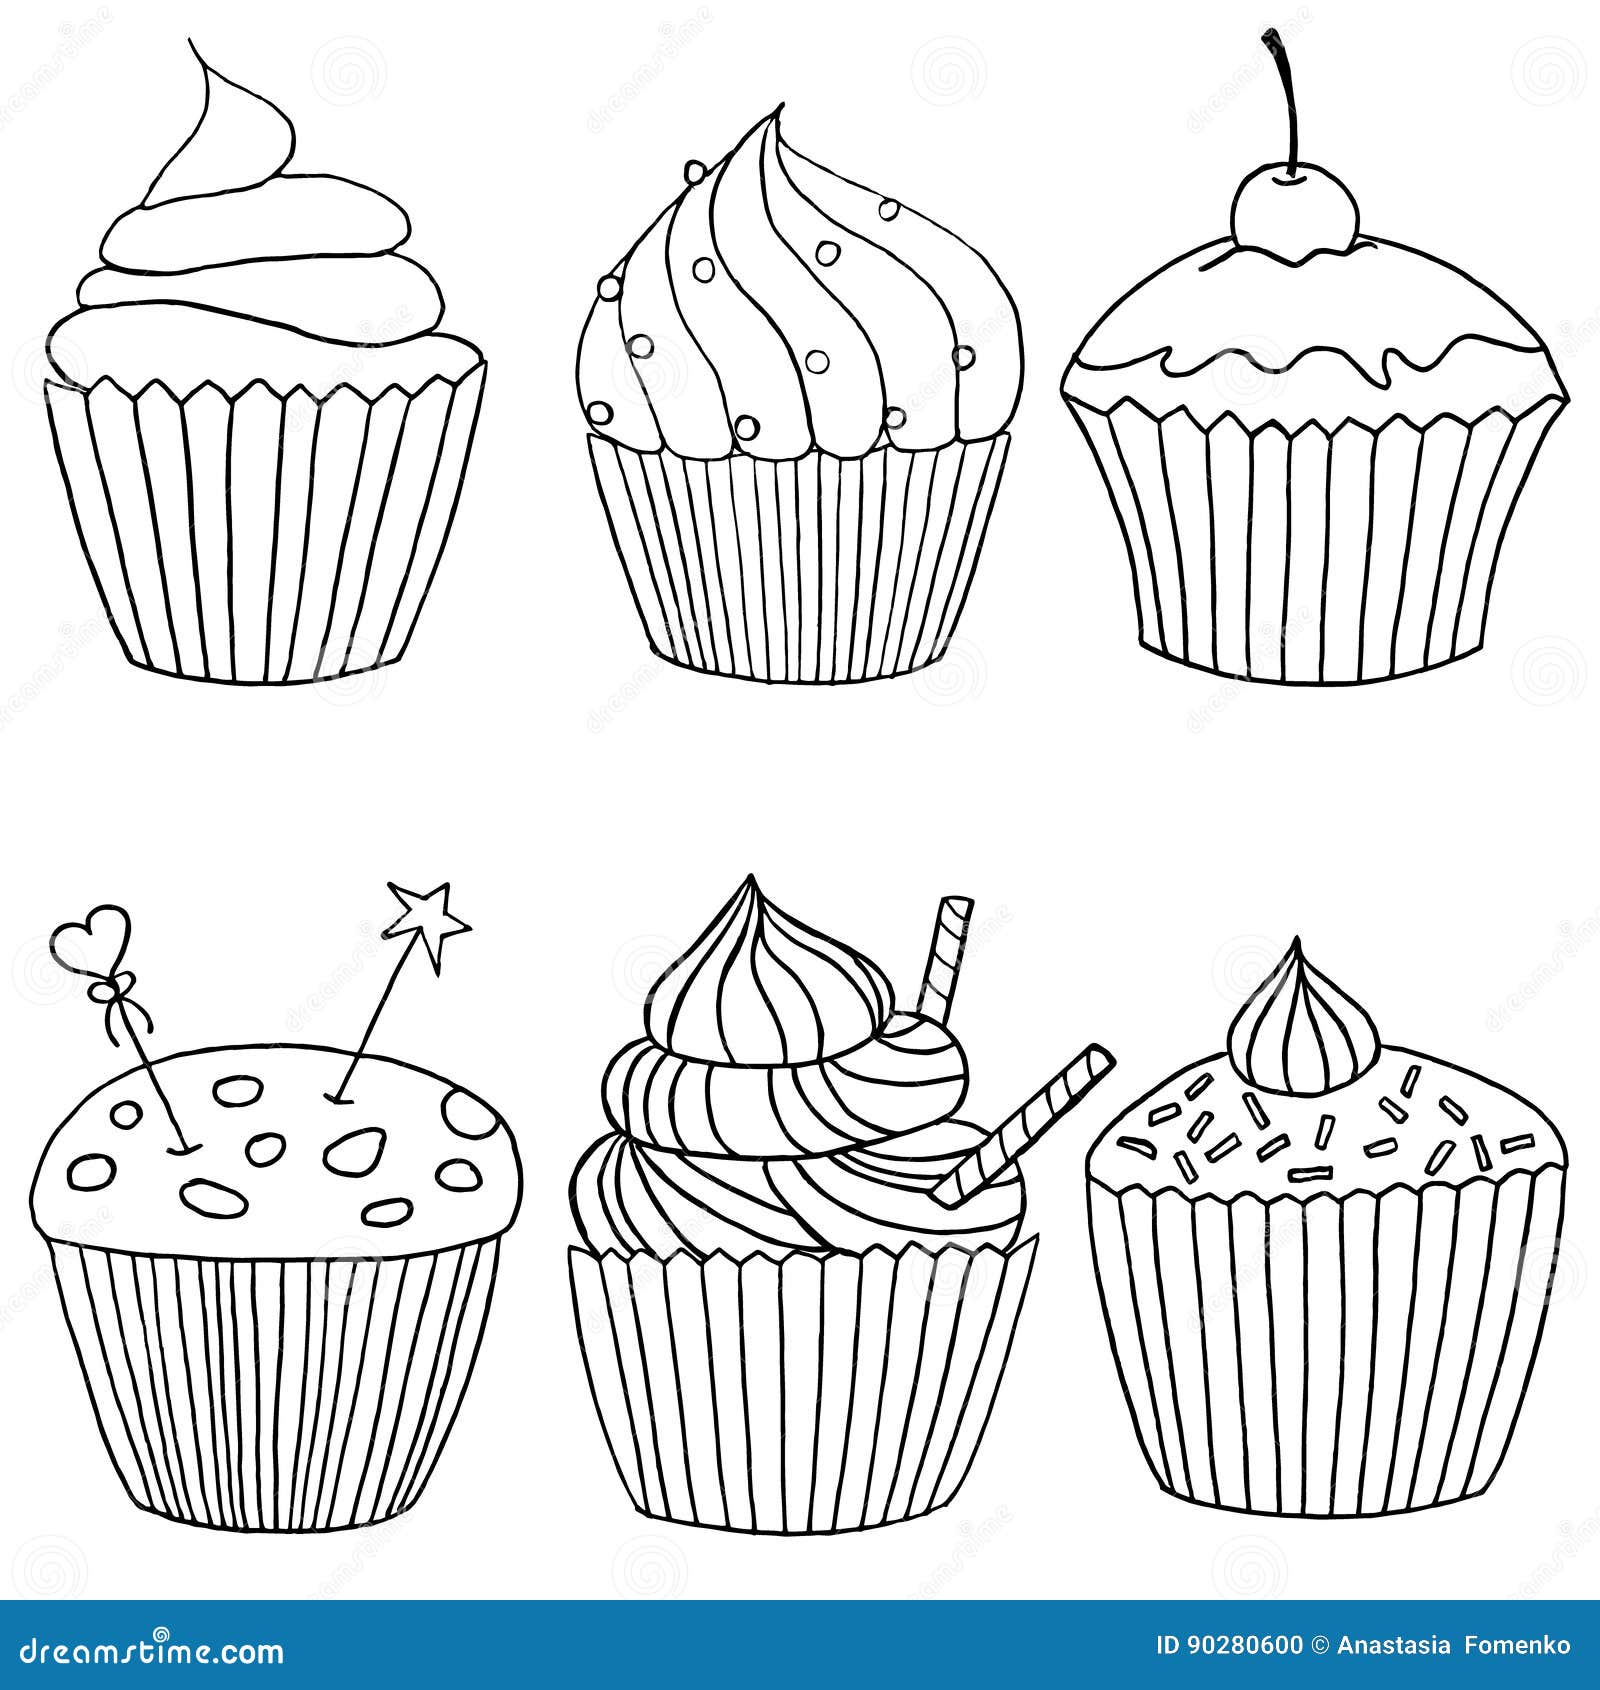 six images of cupcakes in black and white drawnhand stock illustration  illustration of